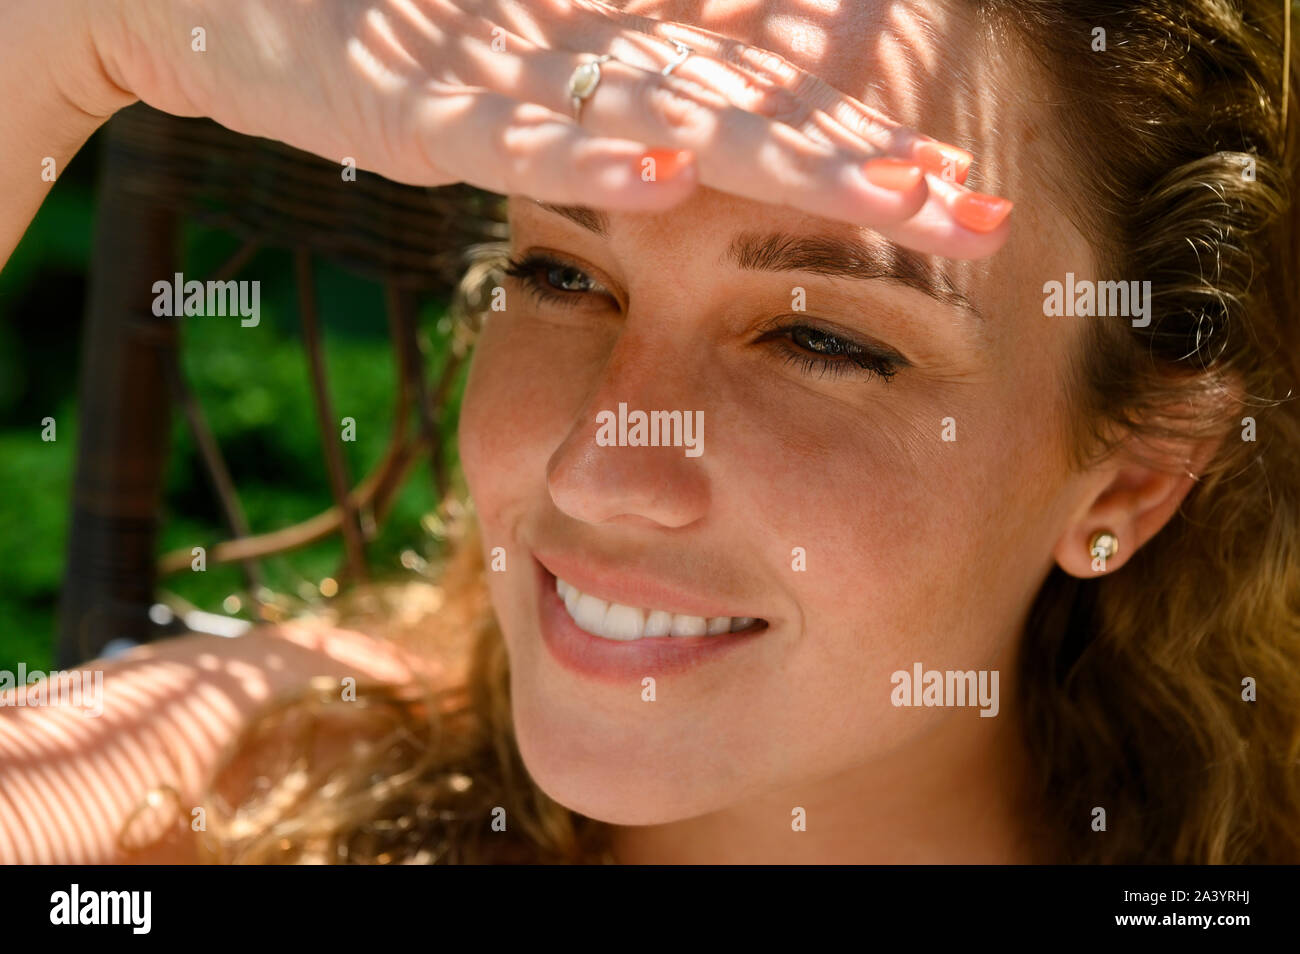 Smiling young woman shielding her eyes Stock Photo